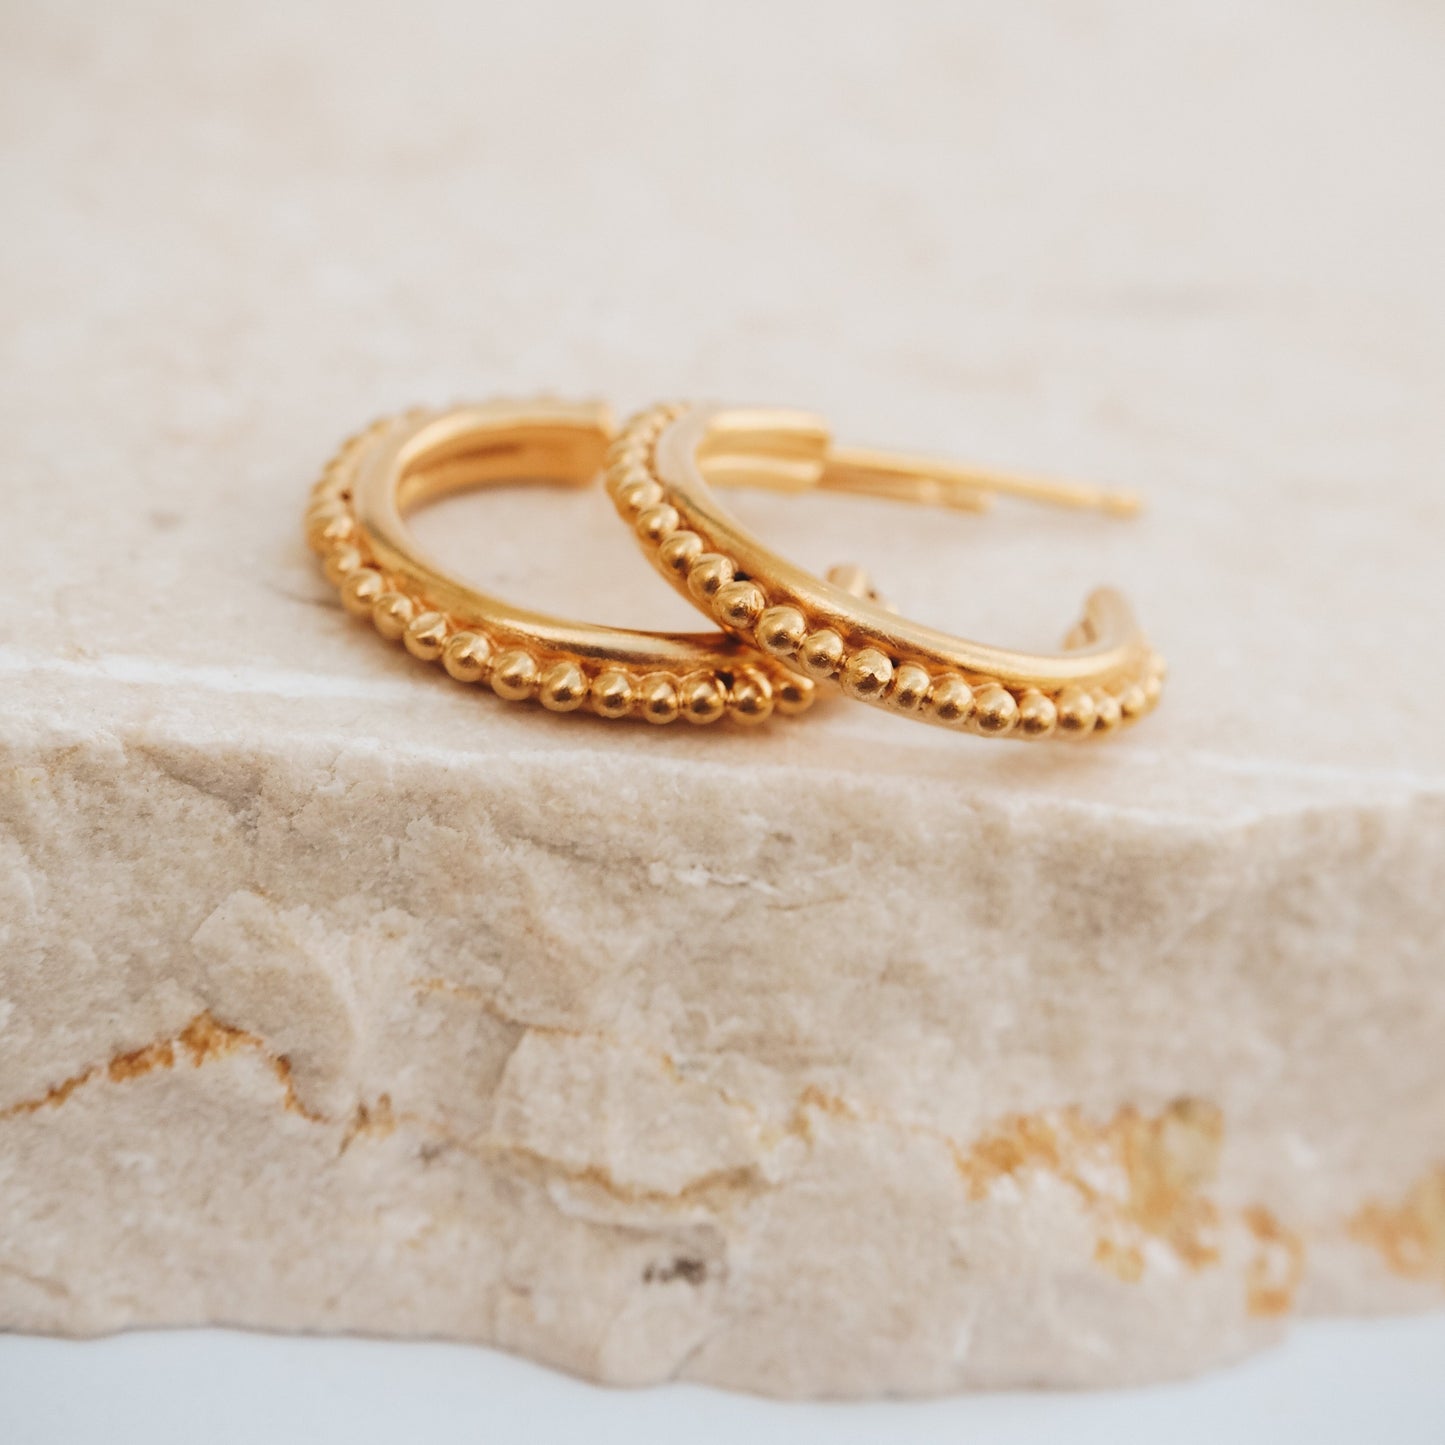 Gold stud hoop earrings with intricate granulation detail, capturing the essence of ancient adornment.